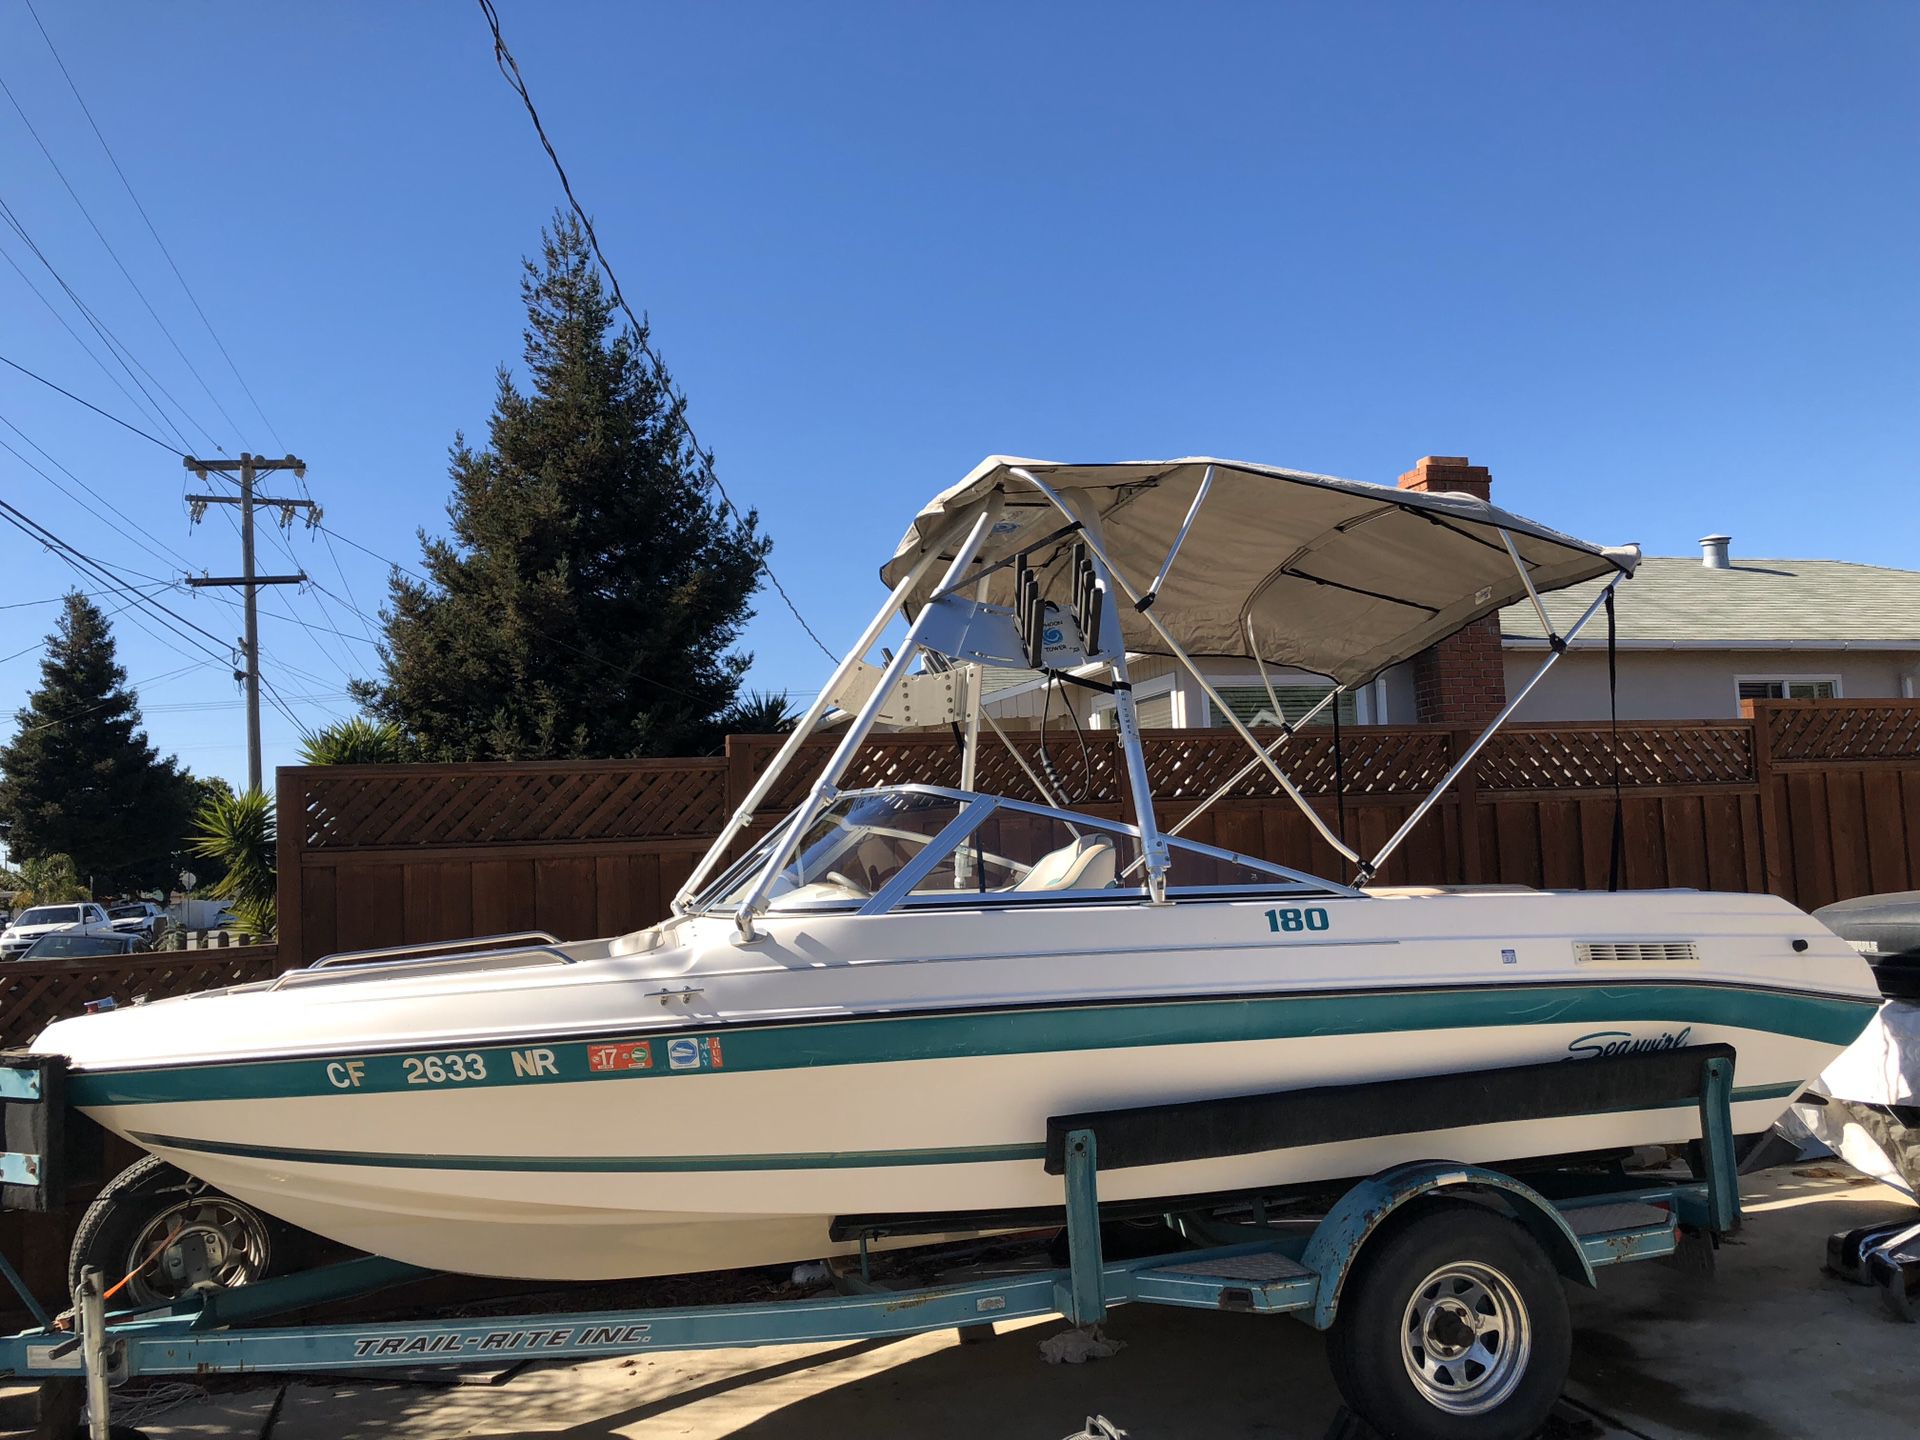 Boat for sale by owner